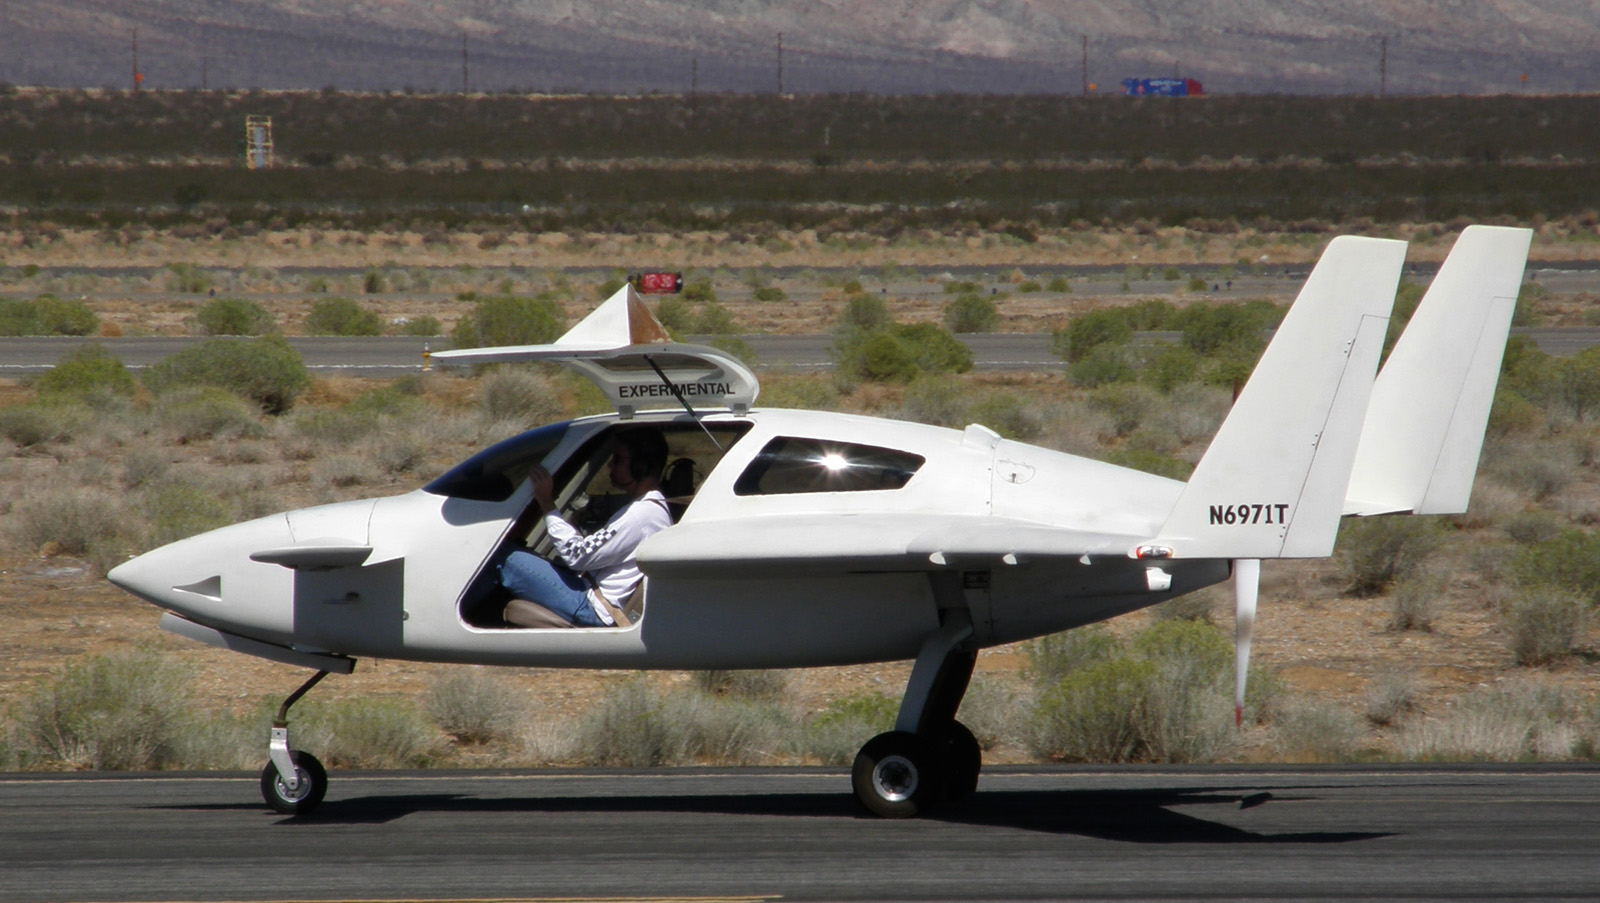 The prototype Rocket Racer, a modified Velocity SE climbing to 10,000 feet (3,000 m) on it first full flight, October 29, 2007 at the Mojave Spaceport